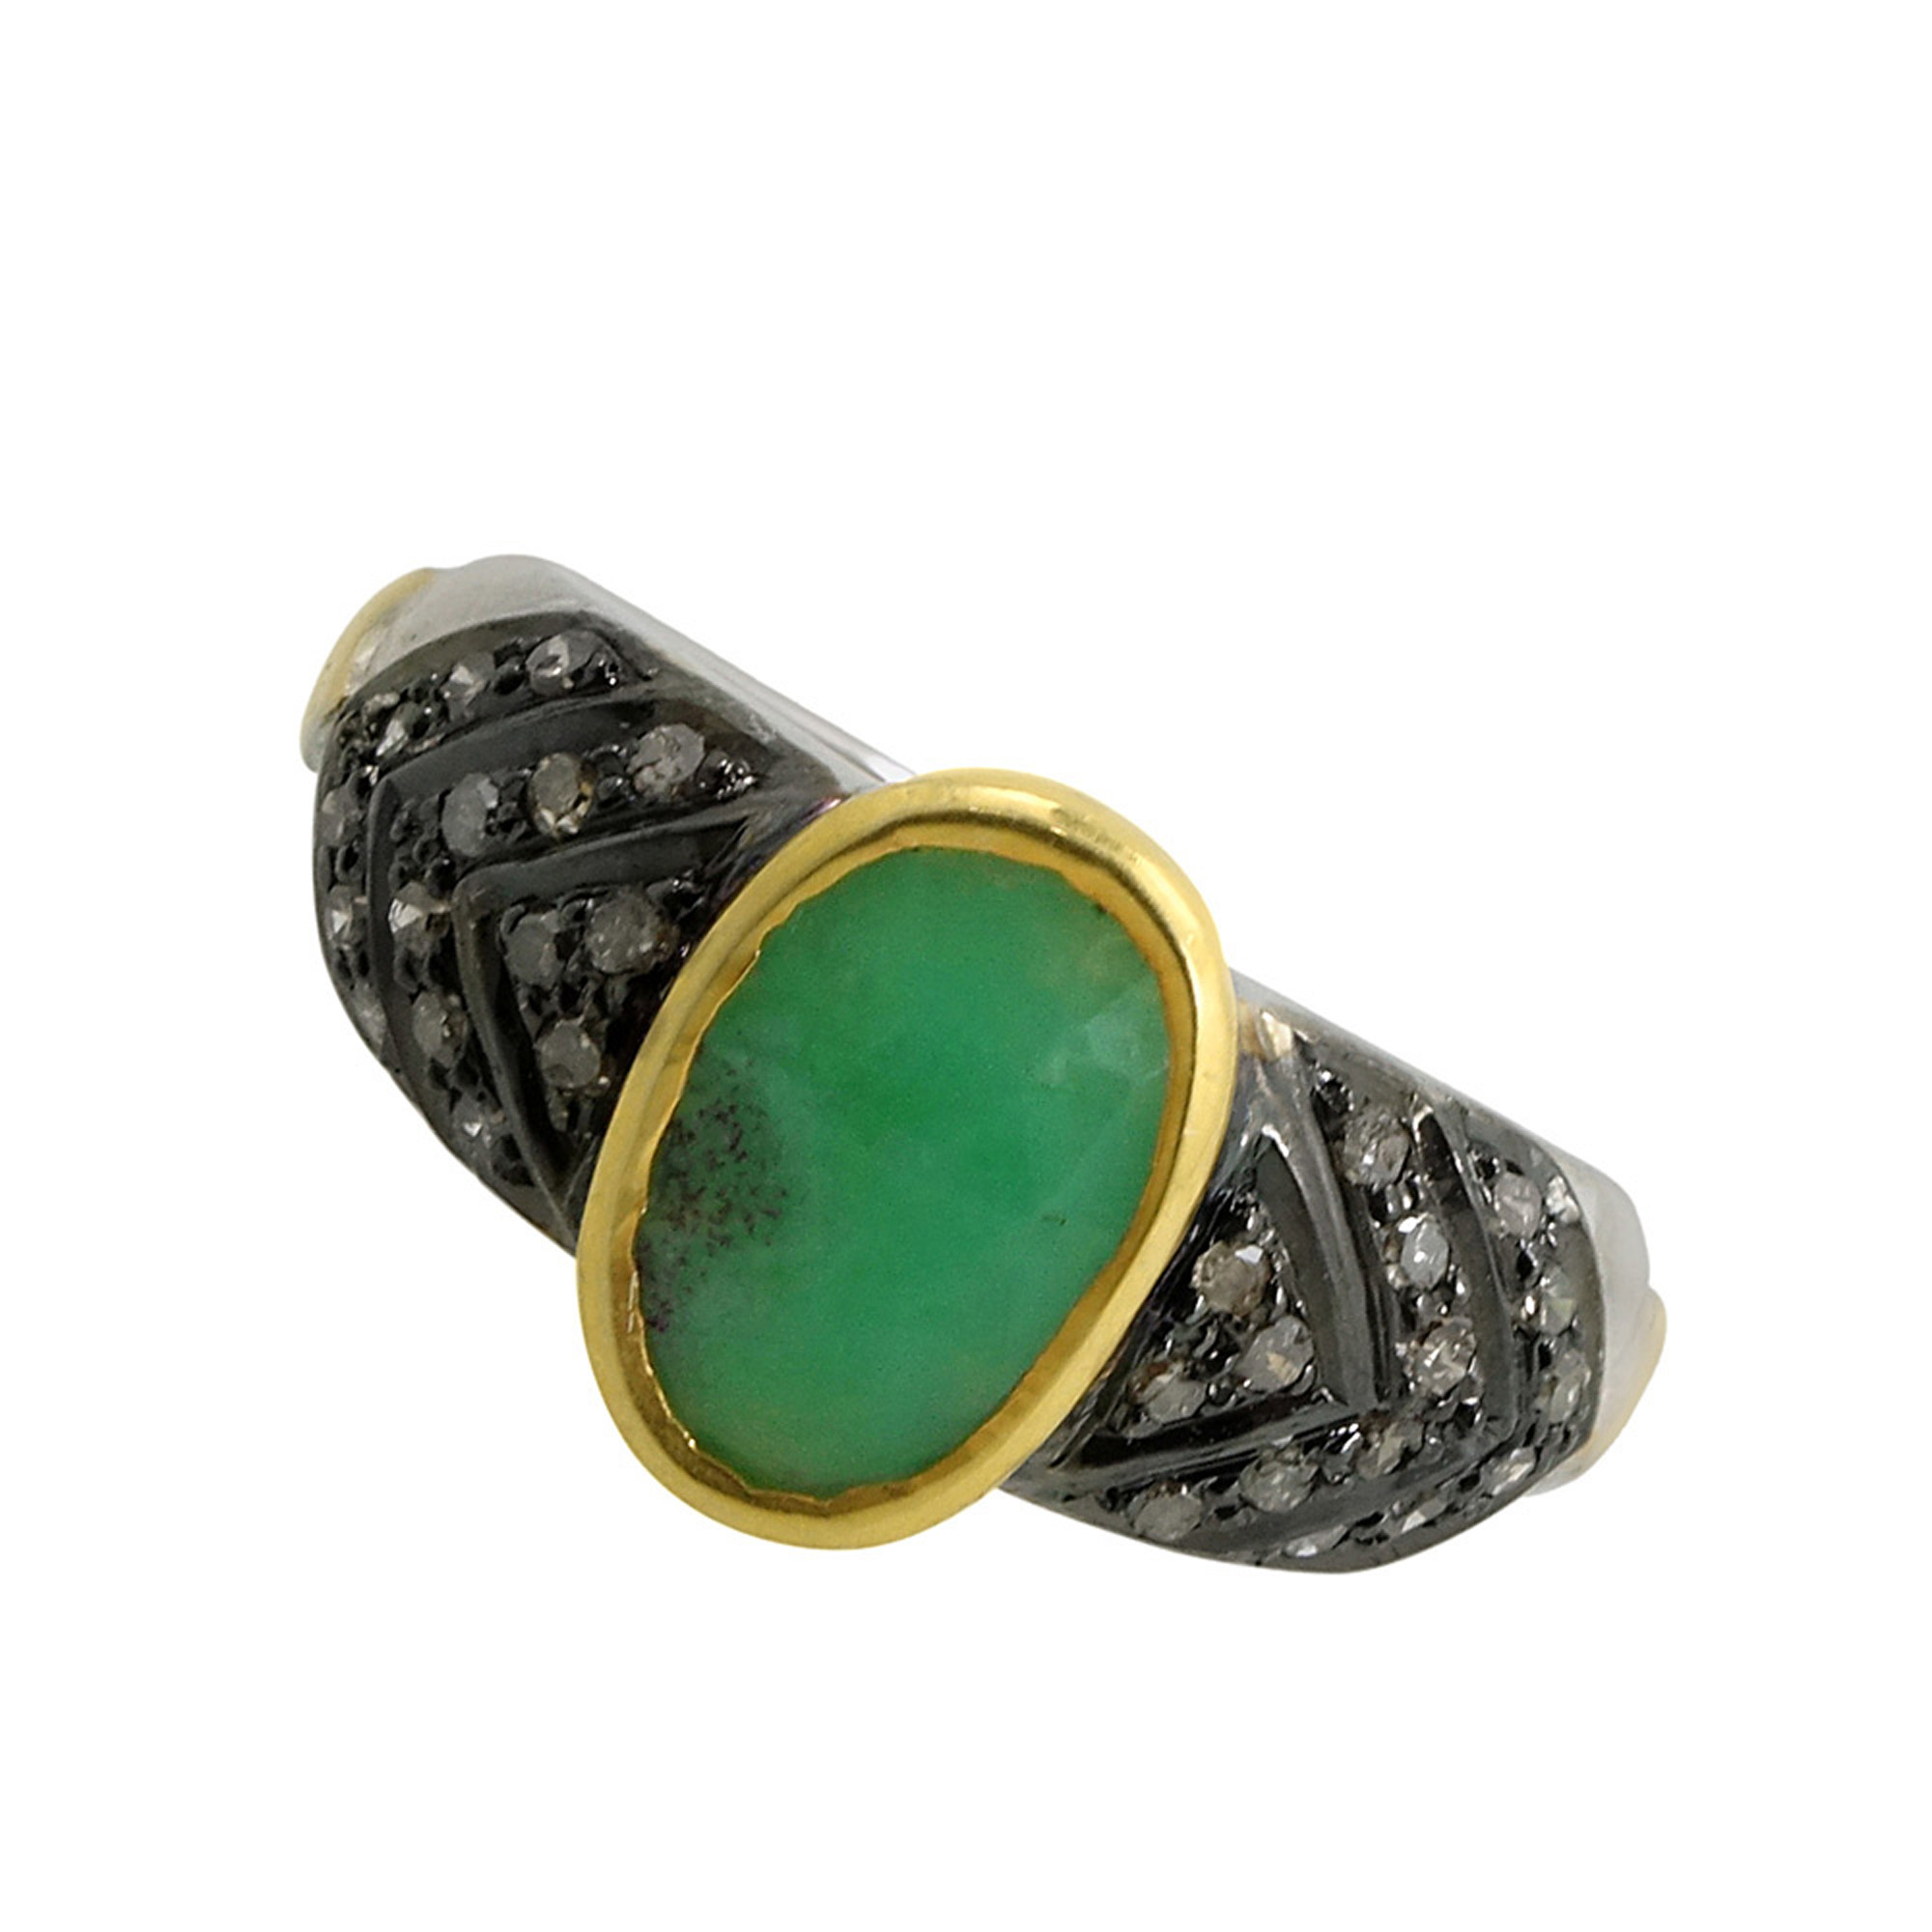 Gold & silver diamond ring with emerald